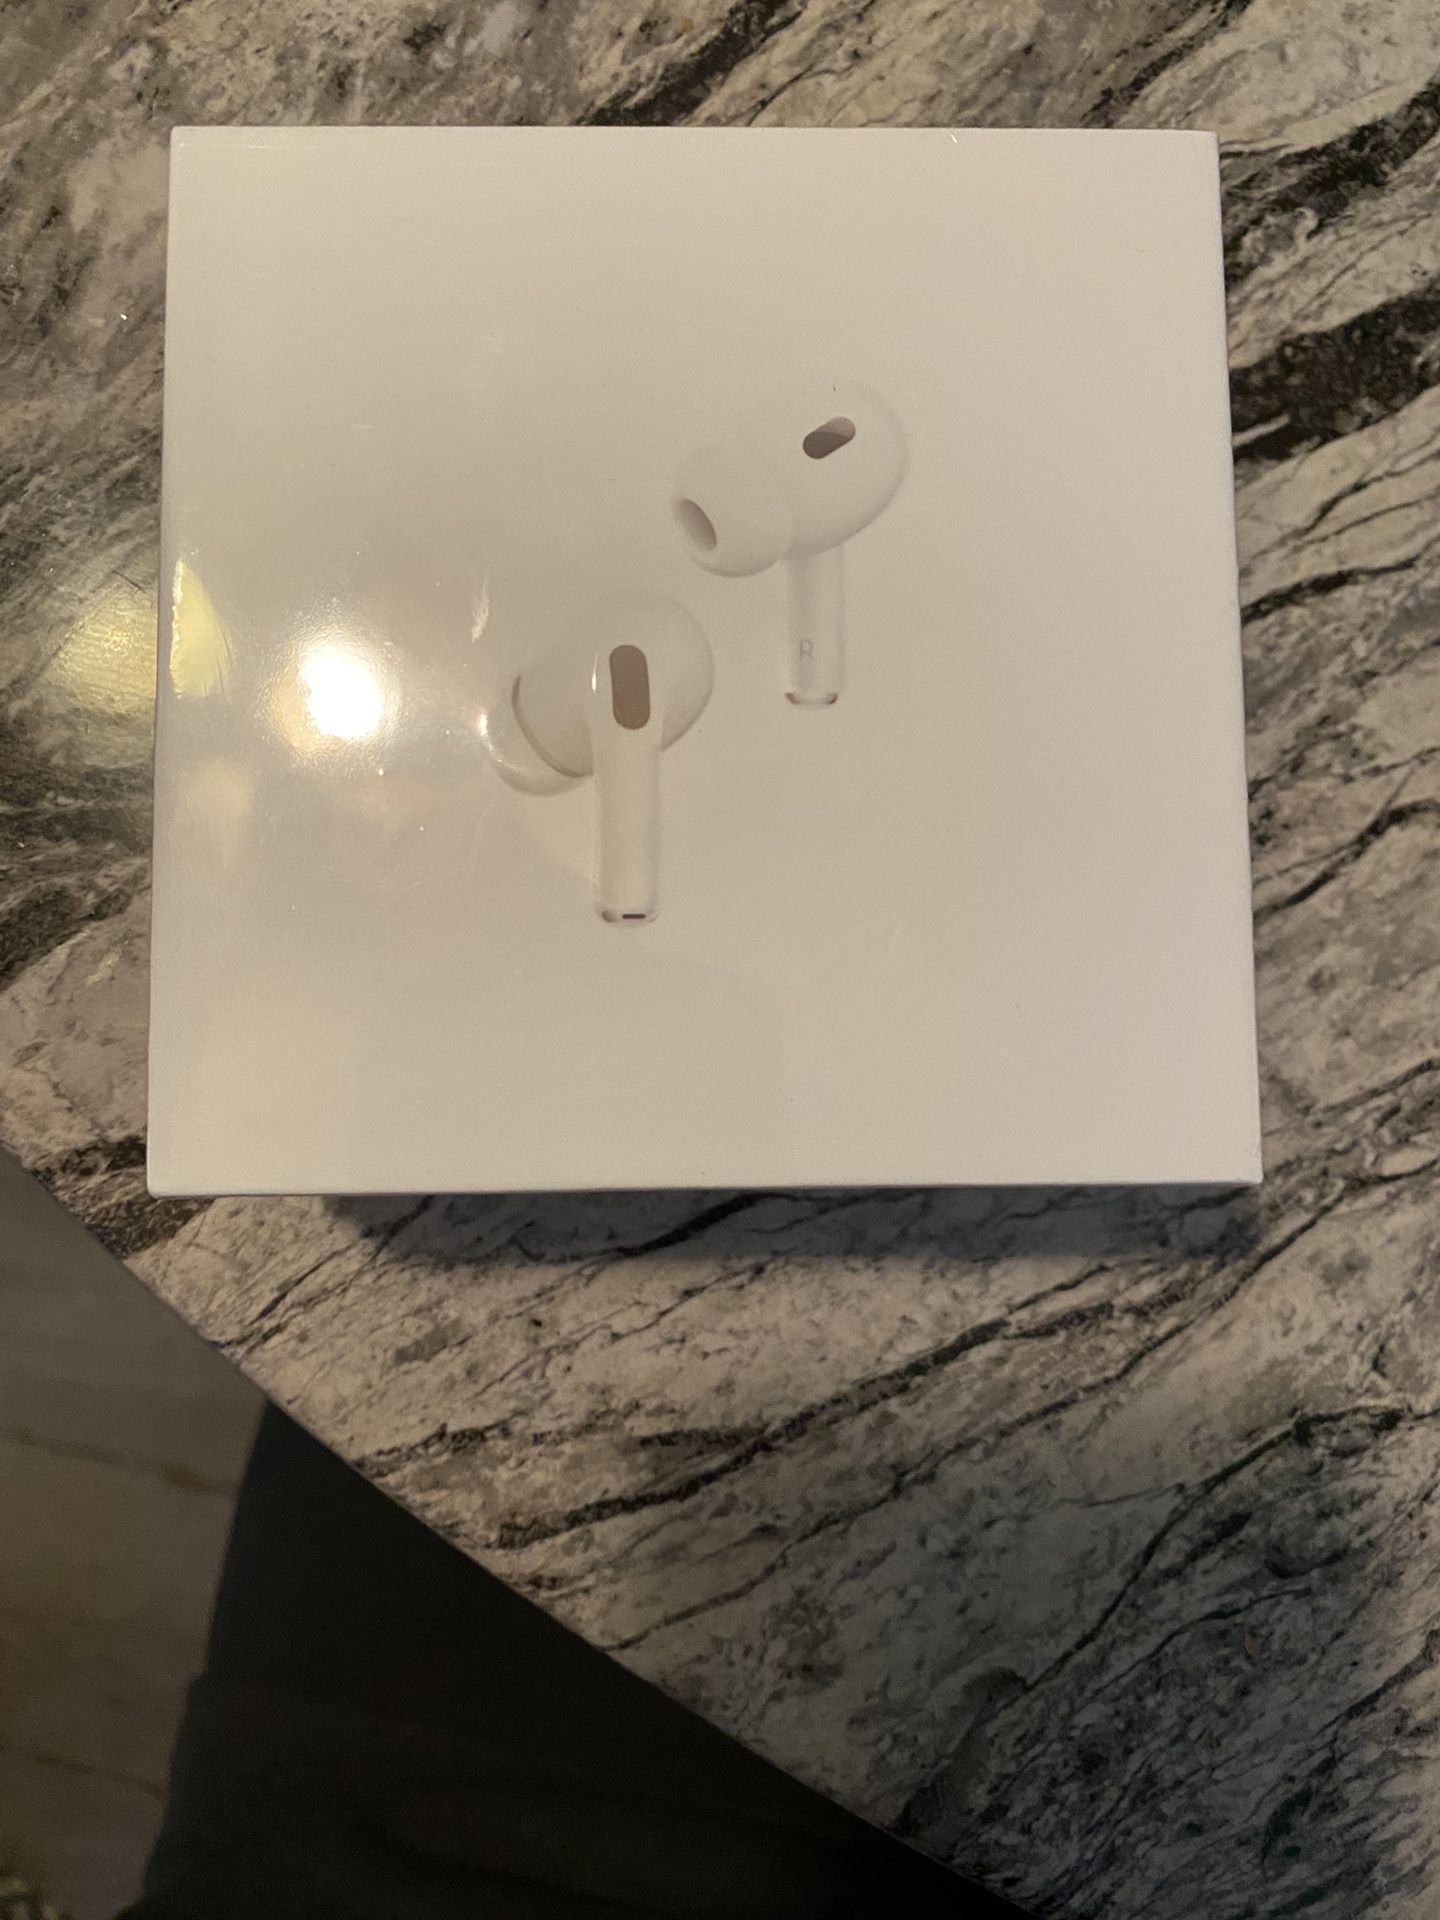 AirPods Pro’s 2